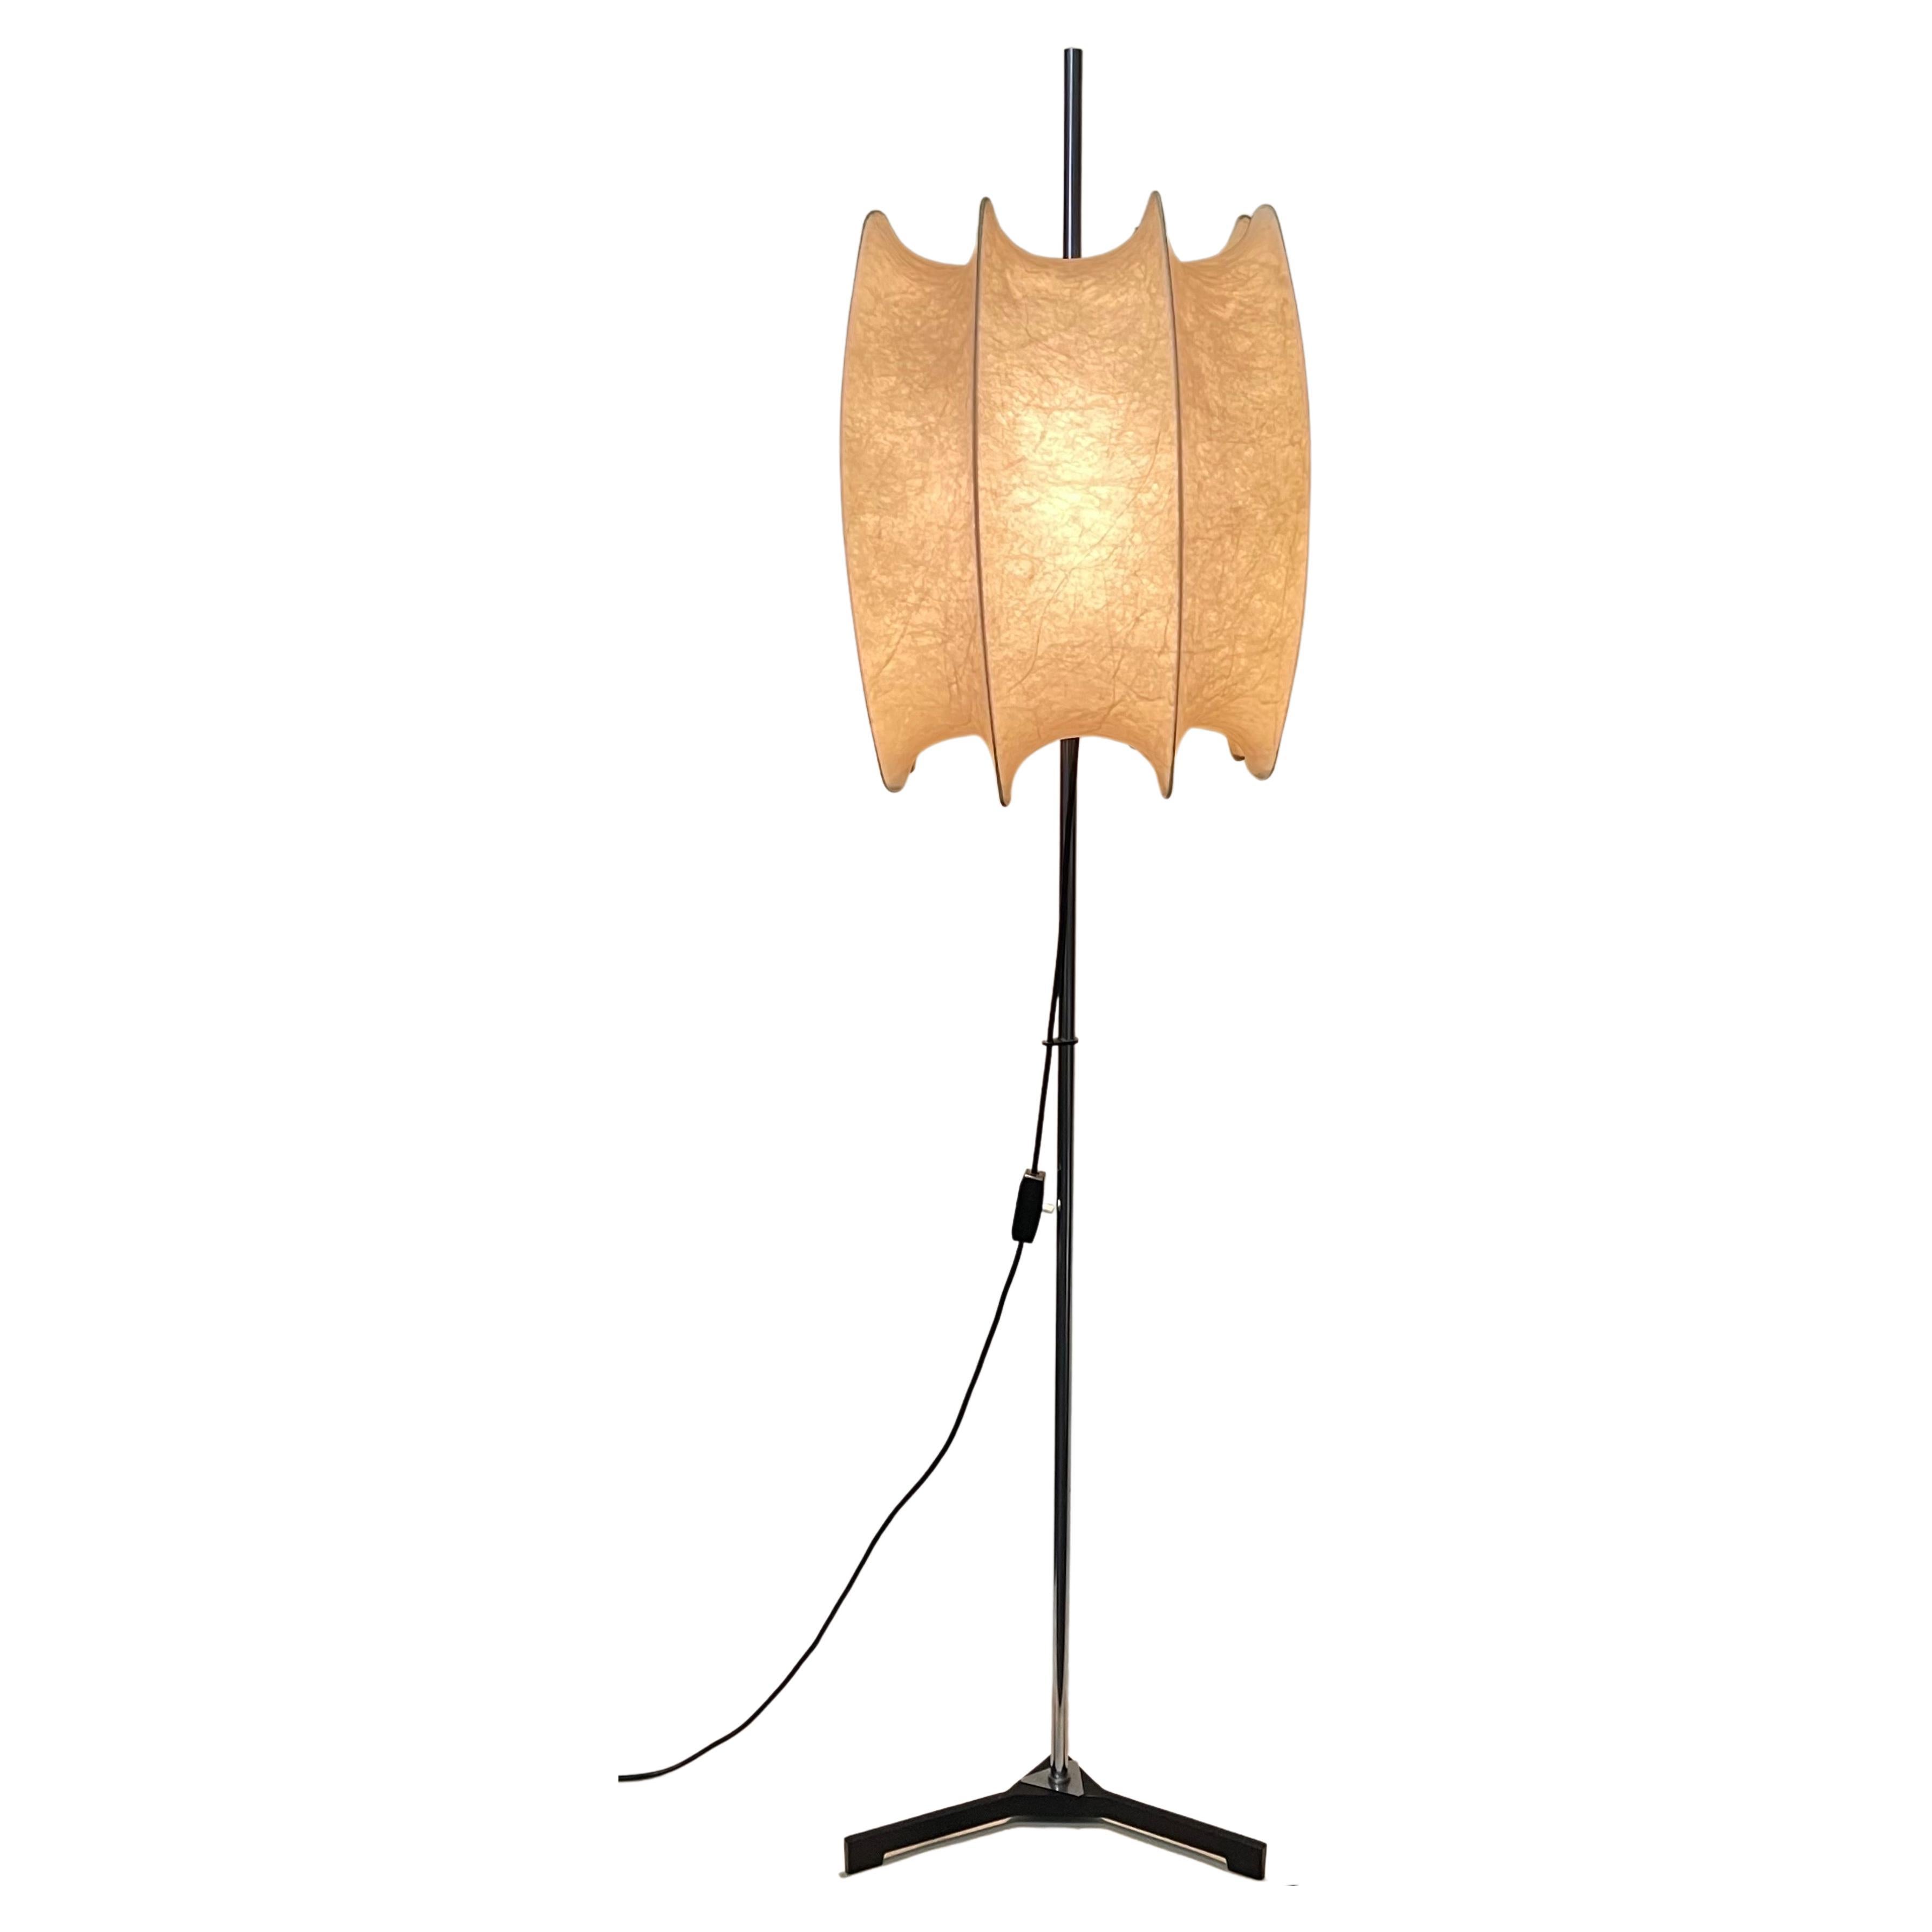 Midcentury Cocoon Floor Lamp Attributed to Goldkant Leuchten, circa 1960s For Sale